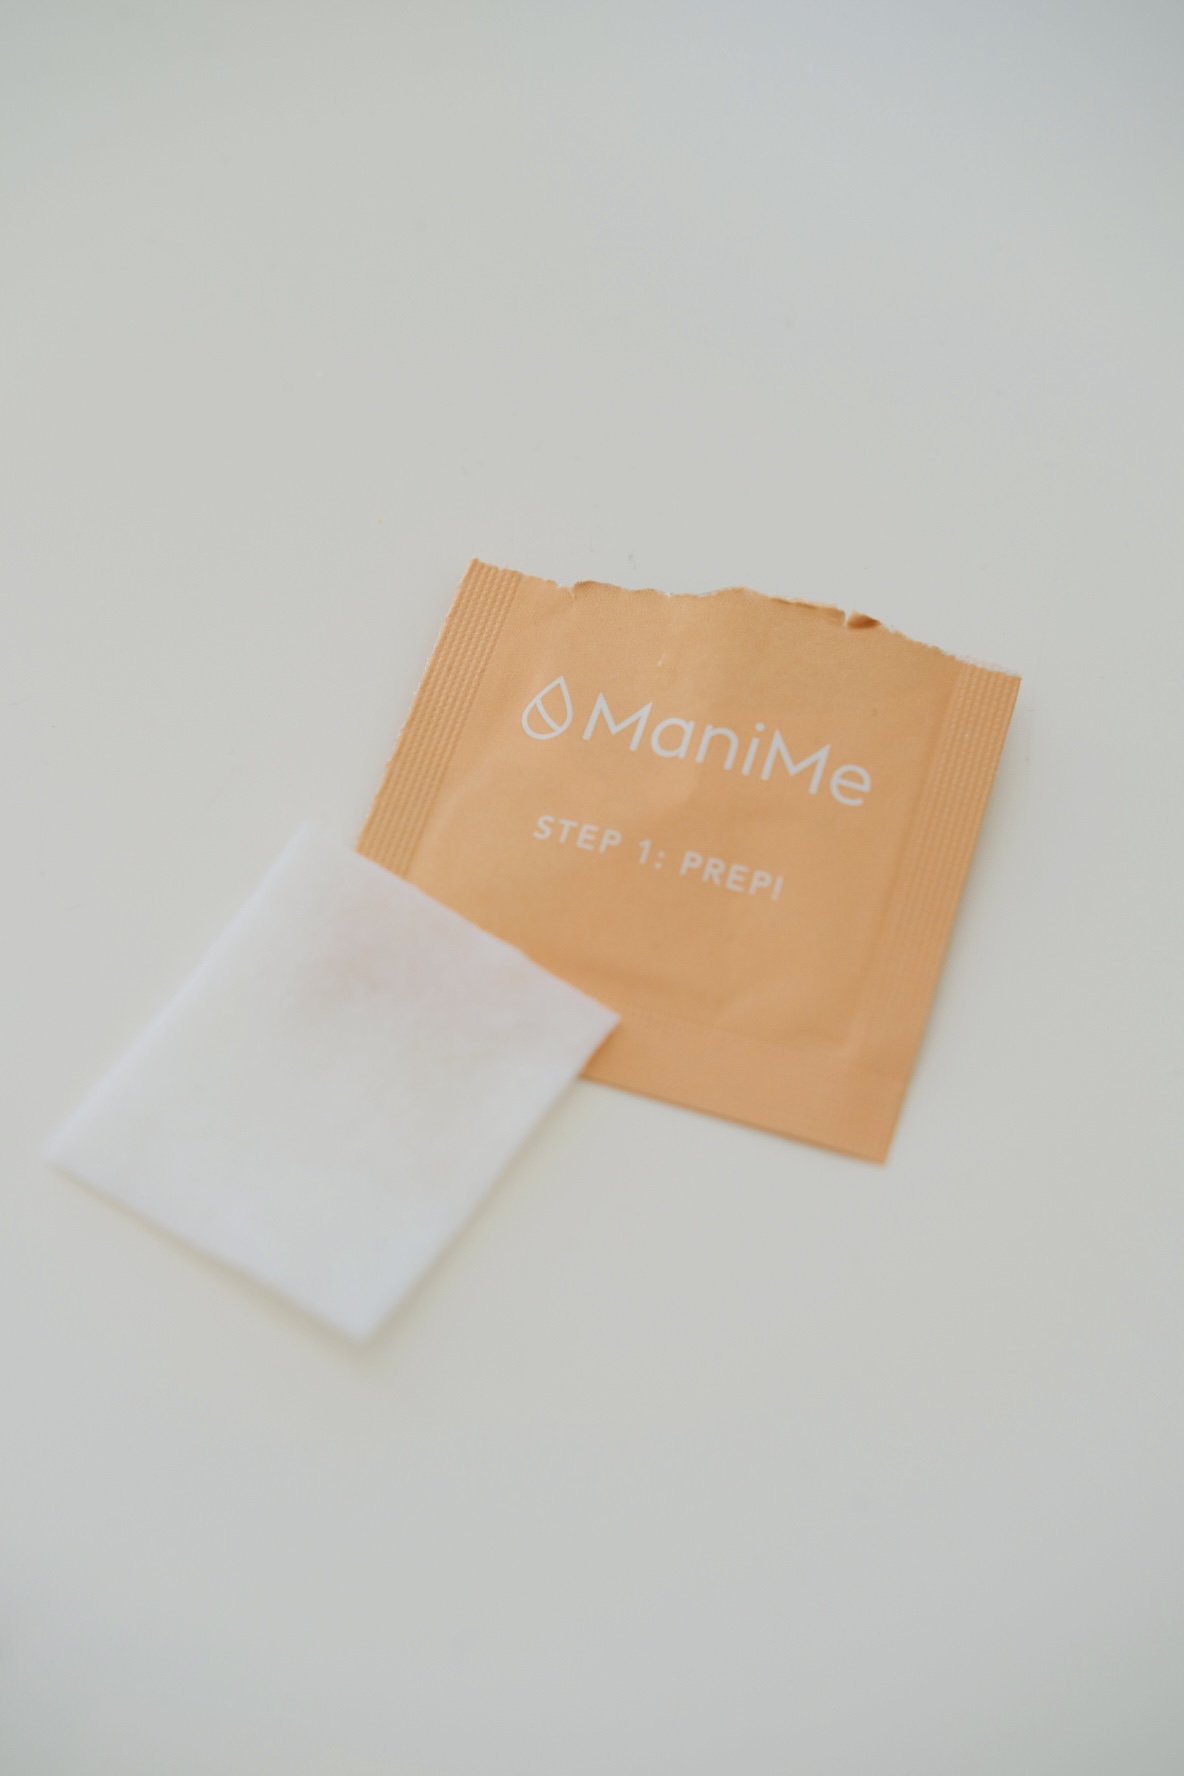 In this ManiMe review, I’ll go through my honest review of ManiMe nails and give you my top tips on how to make your ManiMe gel nails last longer. I also have a ManiMe discount code that can be used for 20% off your first purchase of ManiMe nails. Th